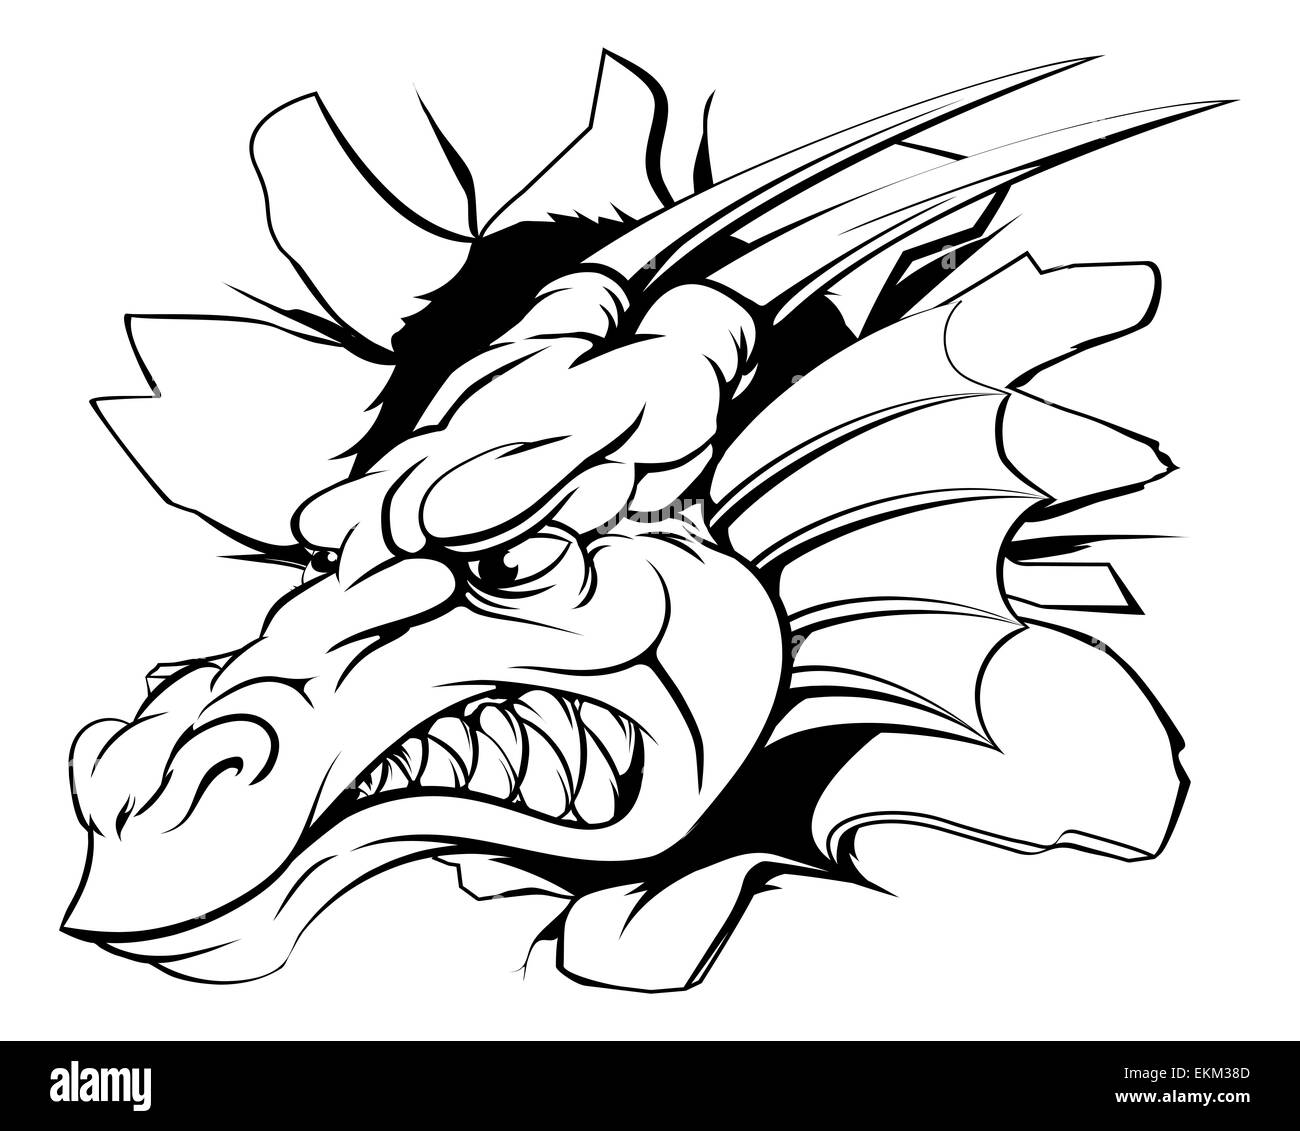 Dragon head smashing out of the wall or background Stock Photo